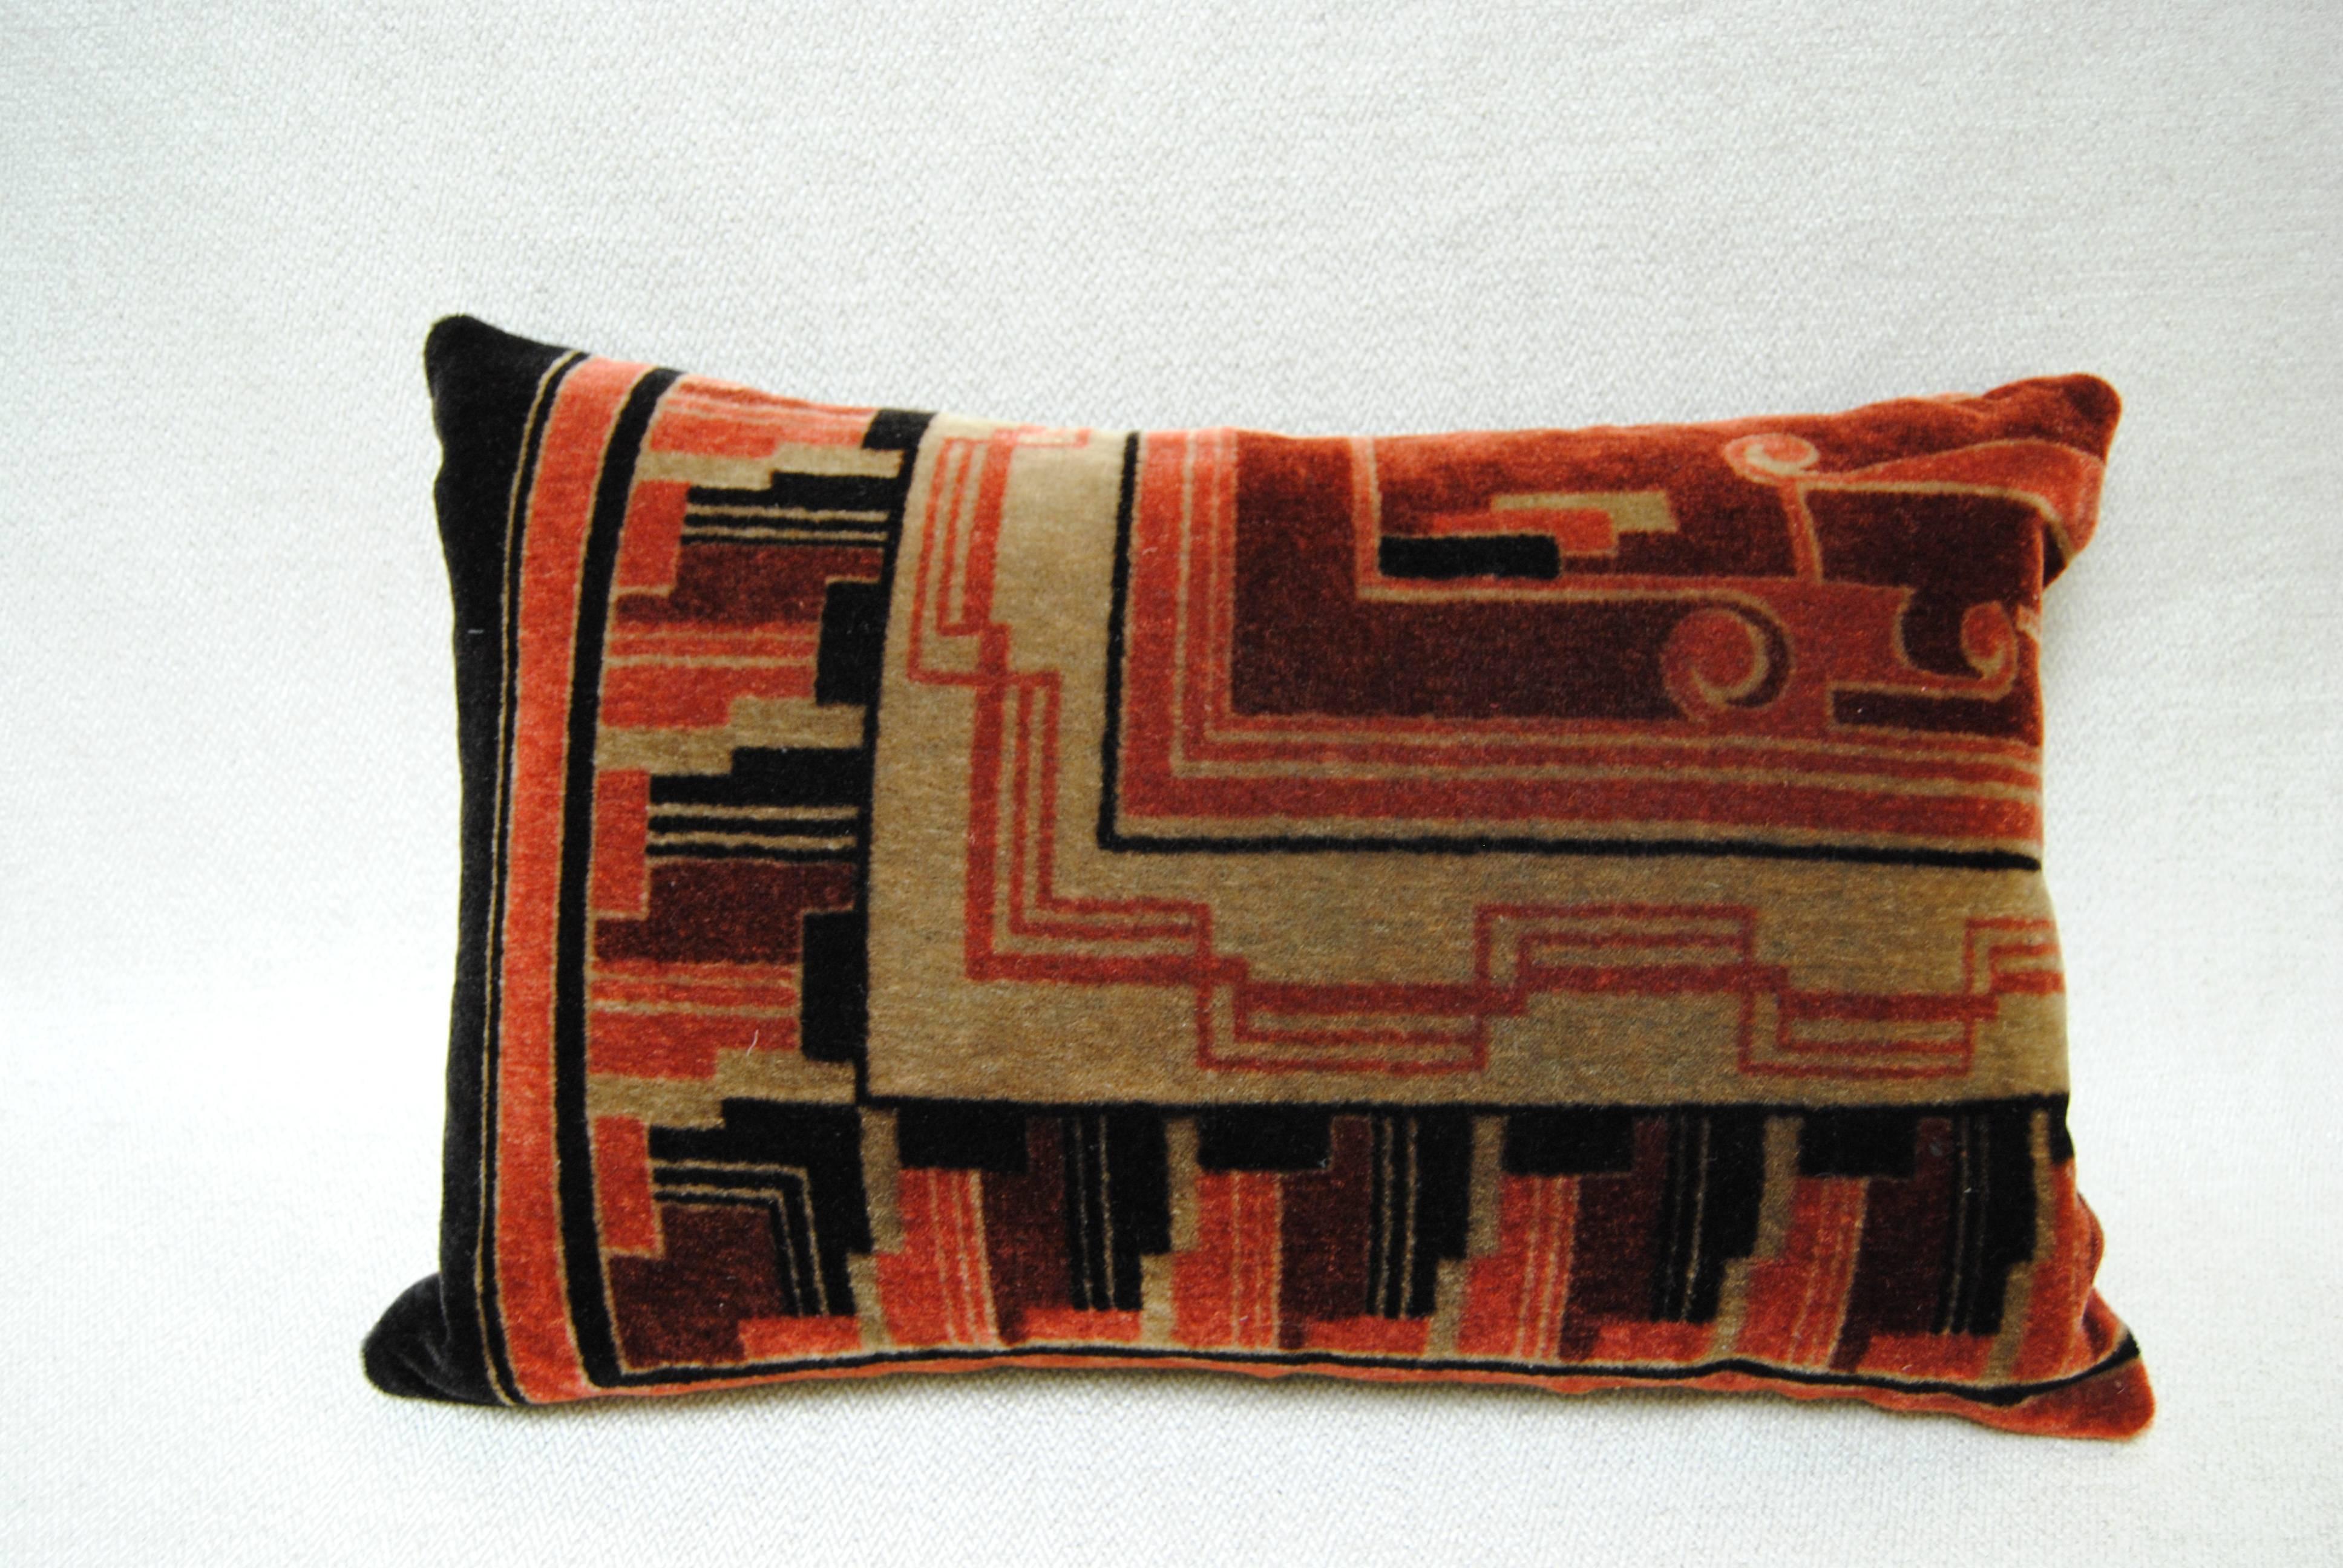 Custom pillow cut from an Amsterdam School hand blocked silk mohair textile, c.1915 to 1927. The Netherlands hired European architects to design the very distinctive Deco buildings in Amsterdam during that period and some also designed furniture and